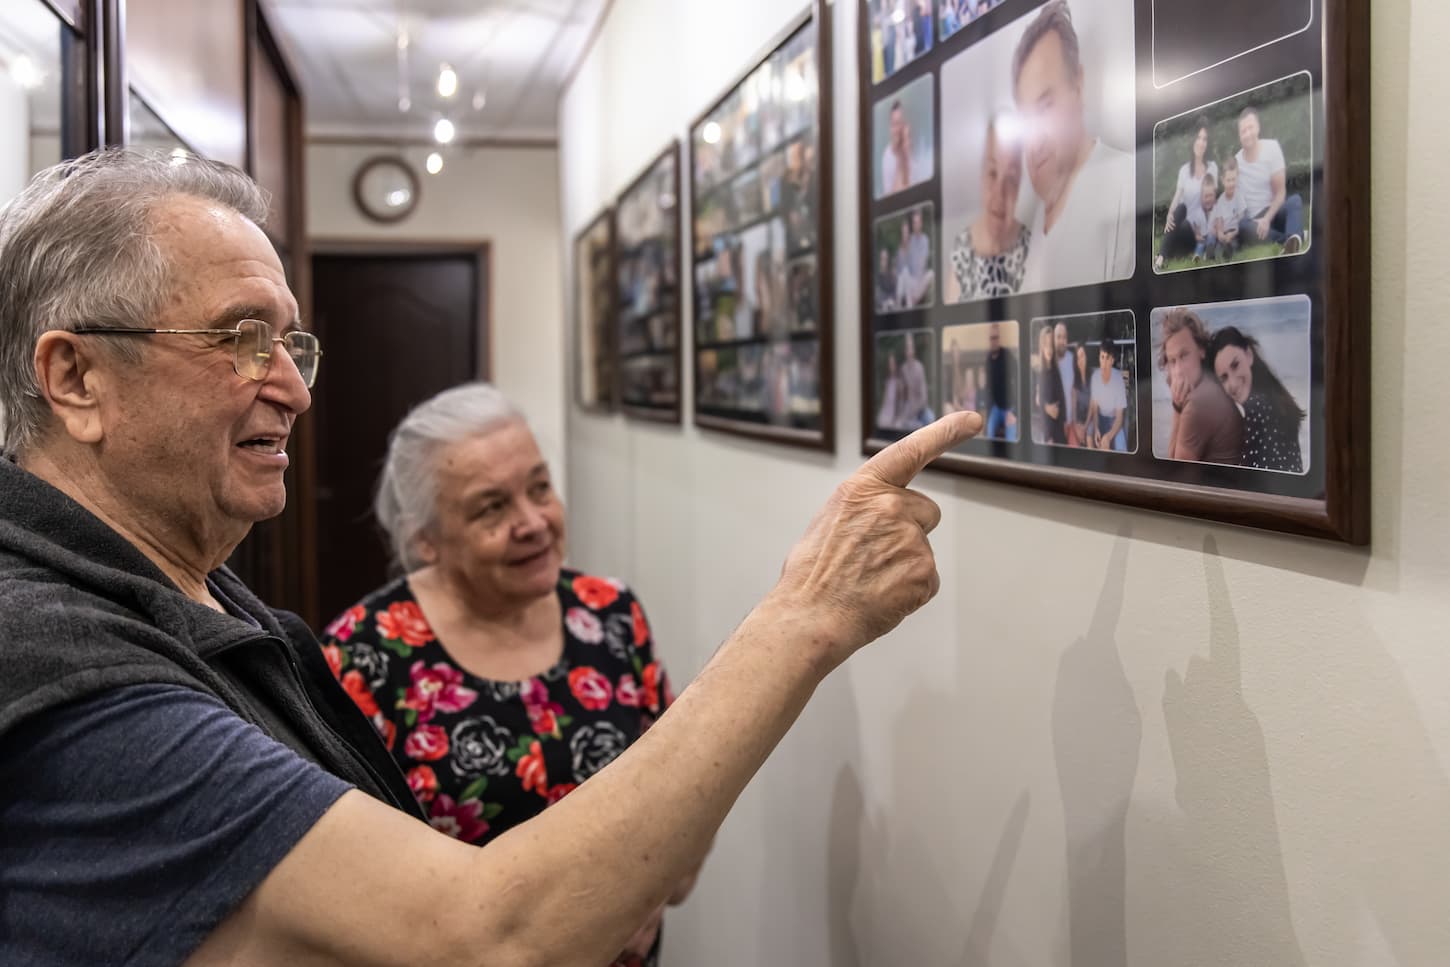 An image of grandparents looking at family photographs on the wall in their home.